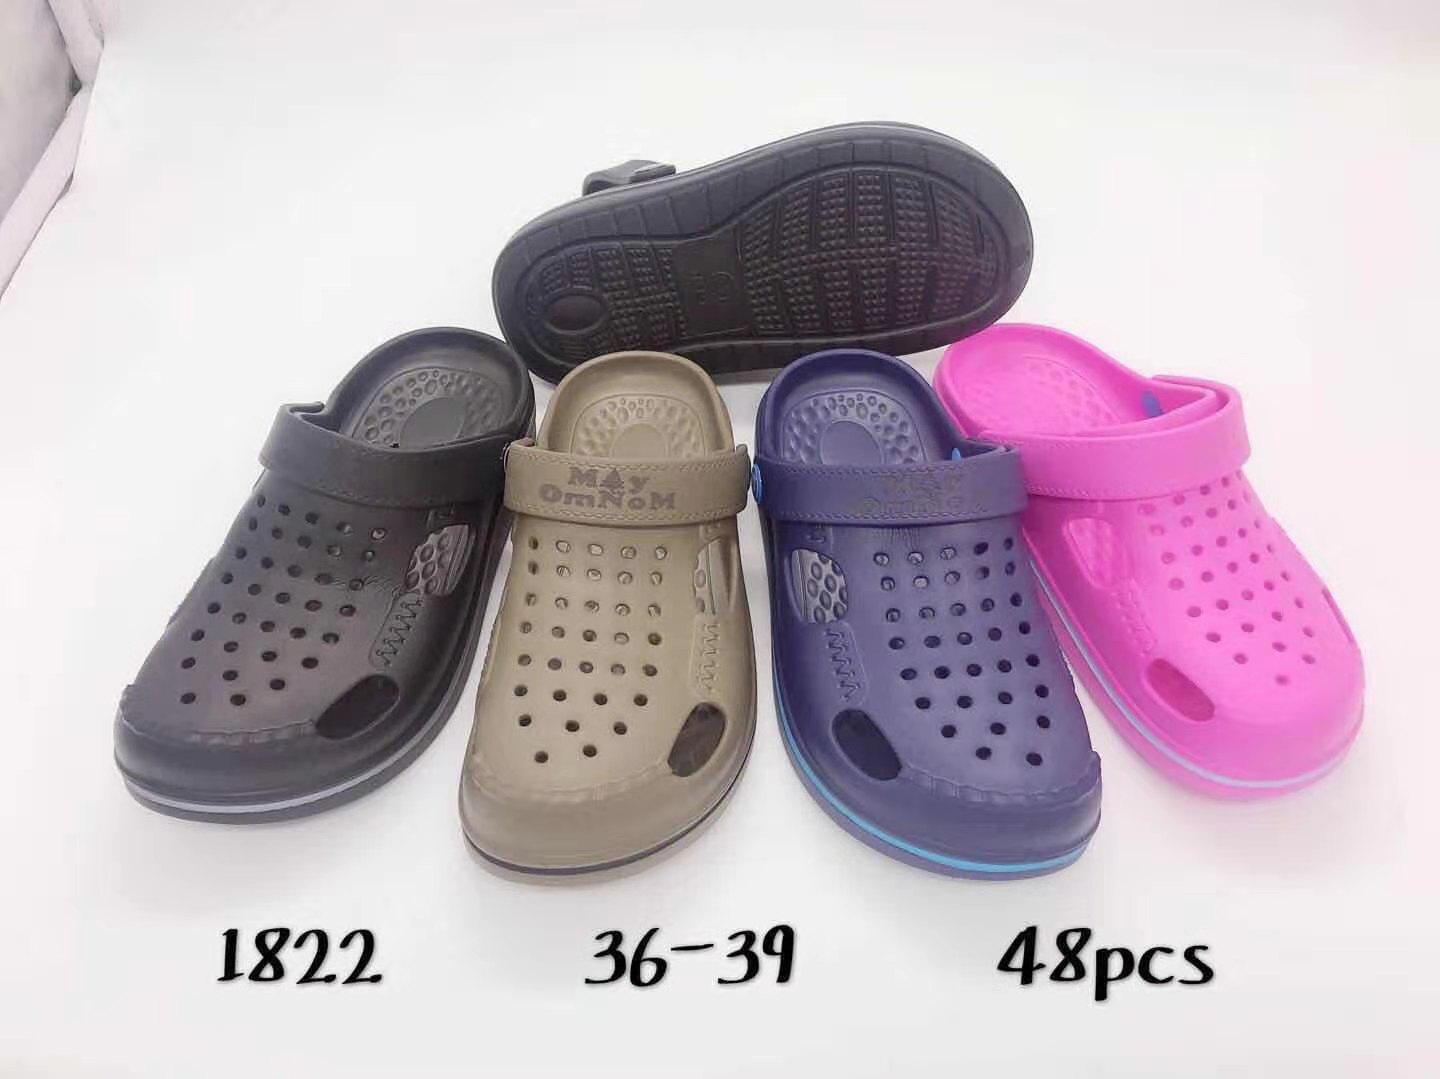 croc like shoes without holes